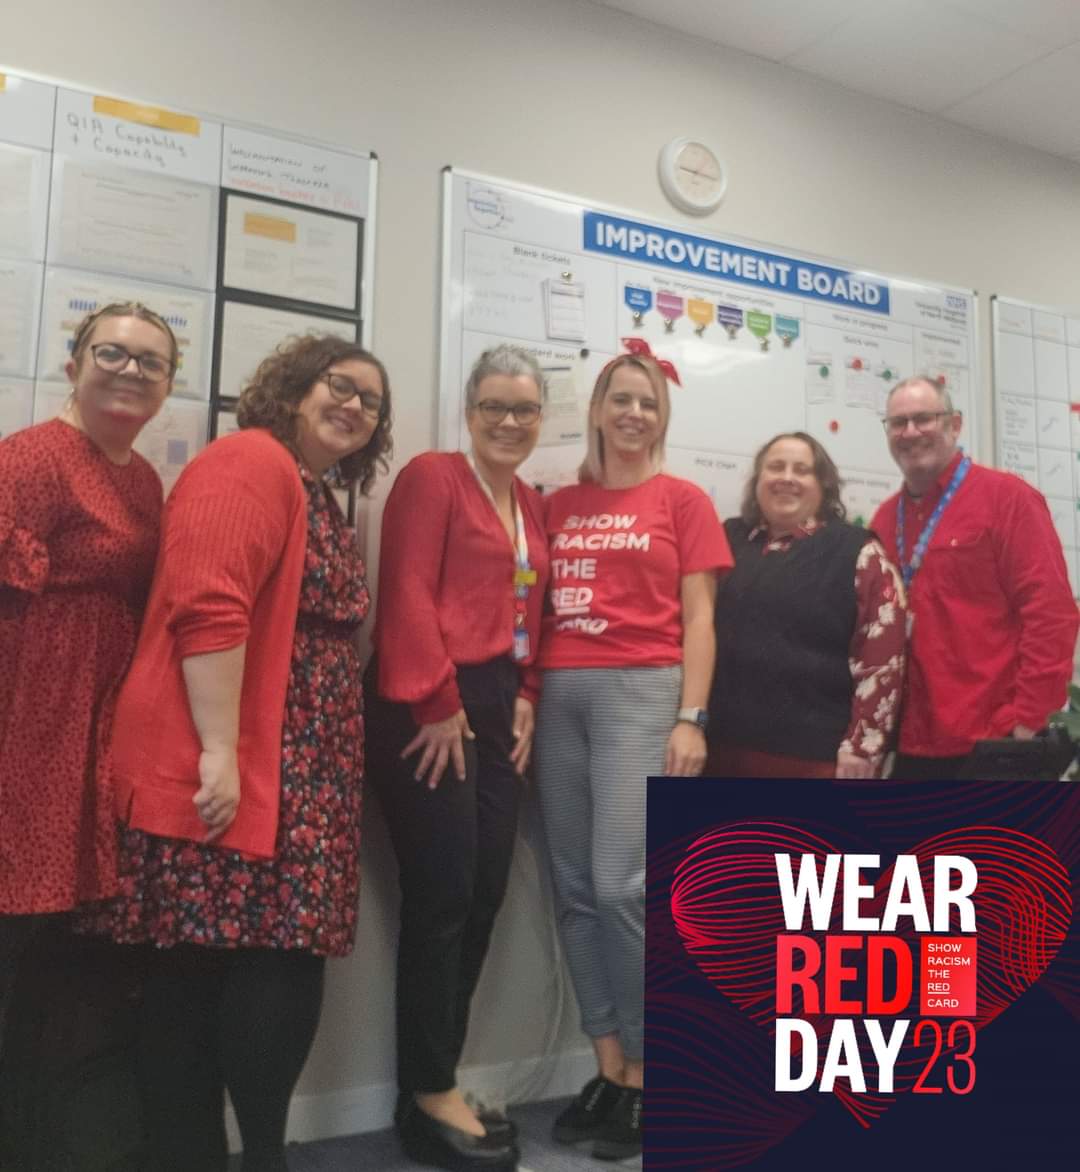 🔴 We're proud to stand together, wearing red, to support #ShowRacismTheRedCard day. Racism has no place, and it's time to kick it out for good. Let's promote unity, diversity, and inclusion. ❤️🌍 #EndRacism #TeamAgainstRacism #UnityInDiversity 🔴 #improvingtogether #Qi